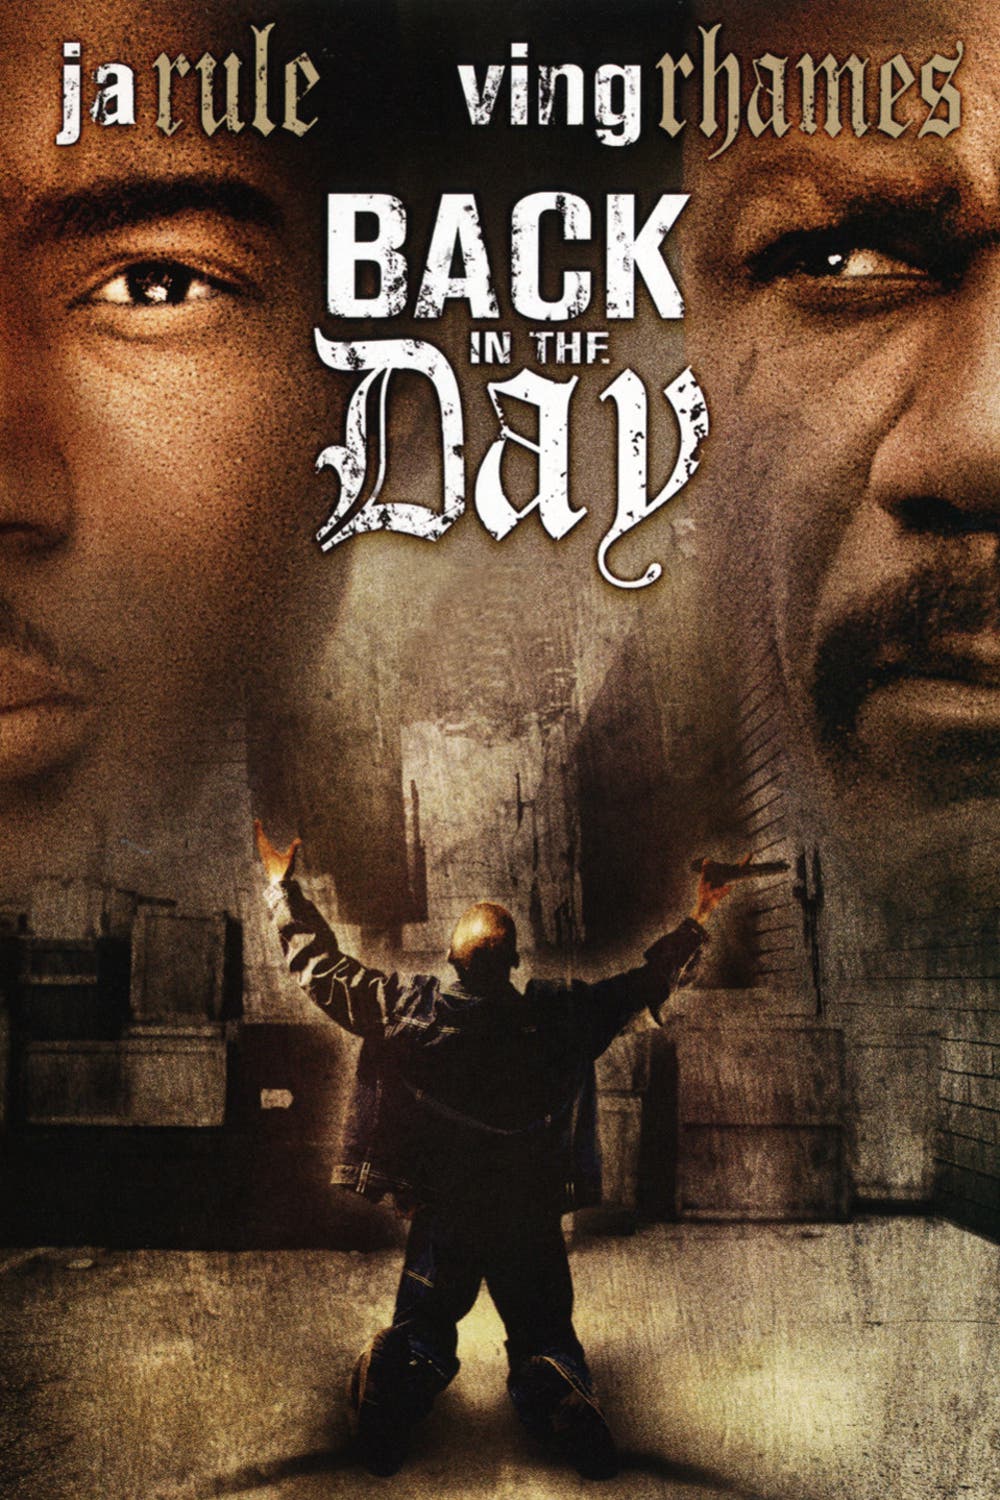 Back in the day (2005)